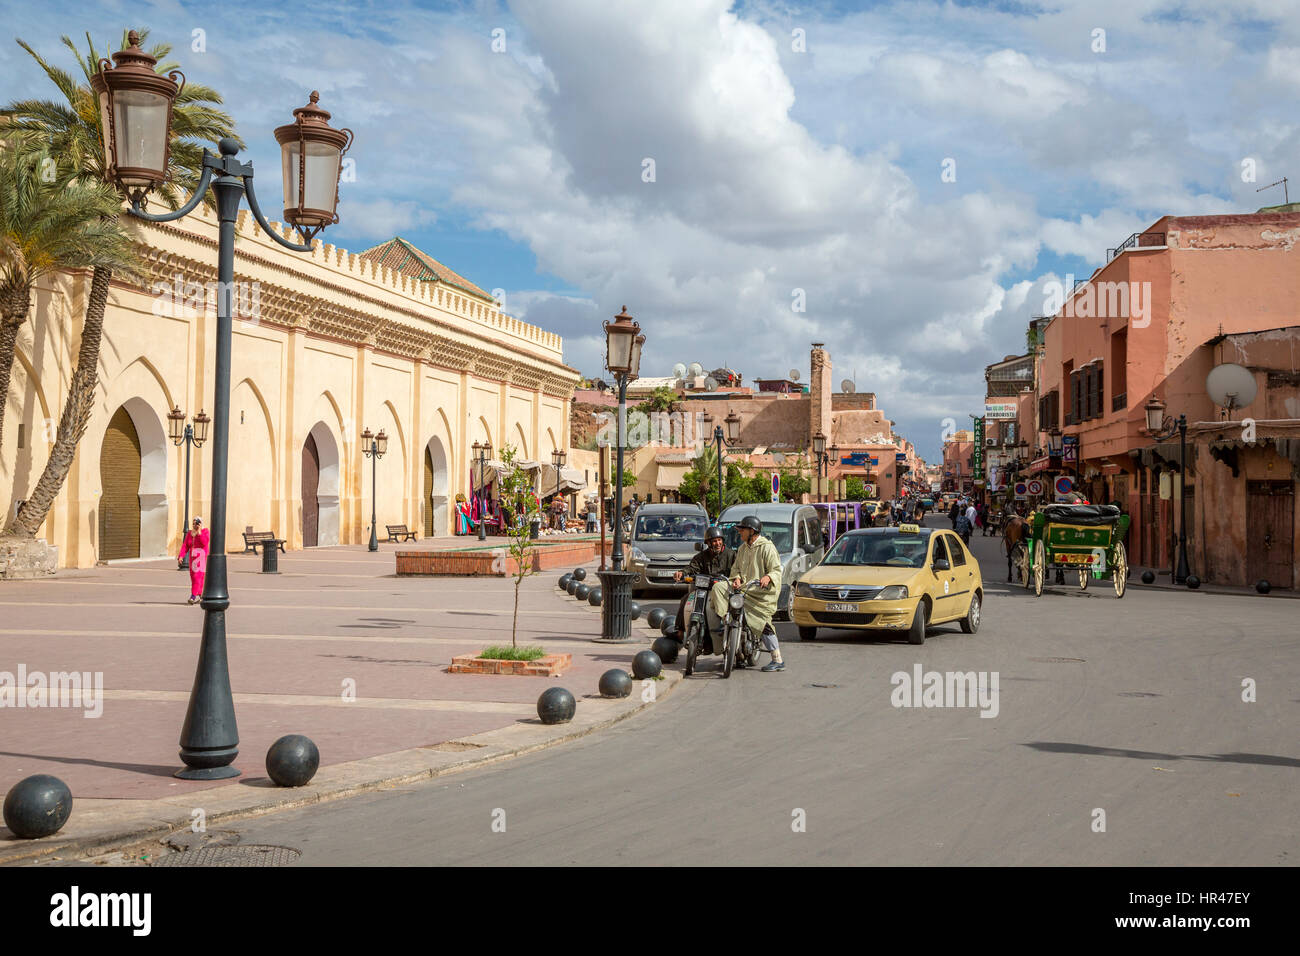 Marrakesh, Morocco.  Street Scene in front of the Moulay El Yazid Mosque, Qasba (Kasba) District, by the Saadian Tombs. Stock Photo